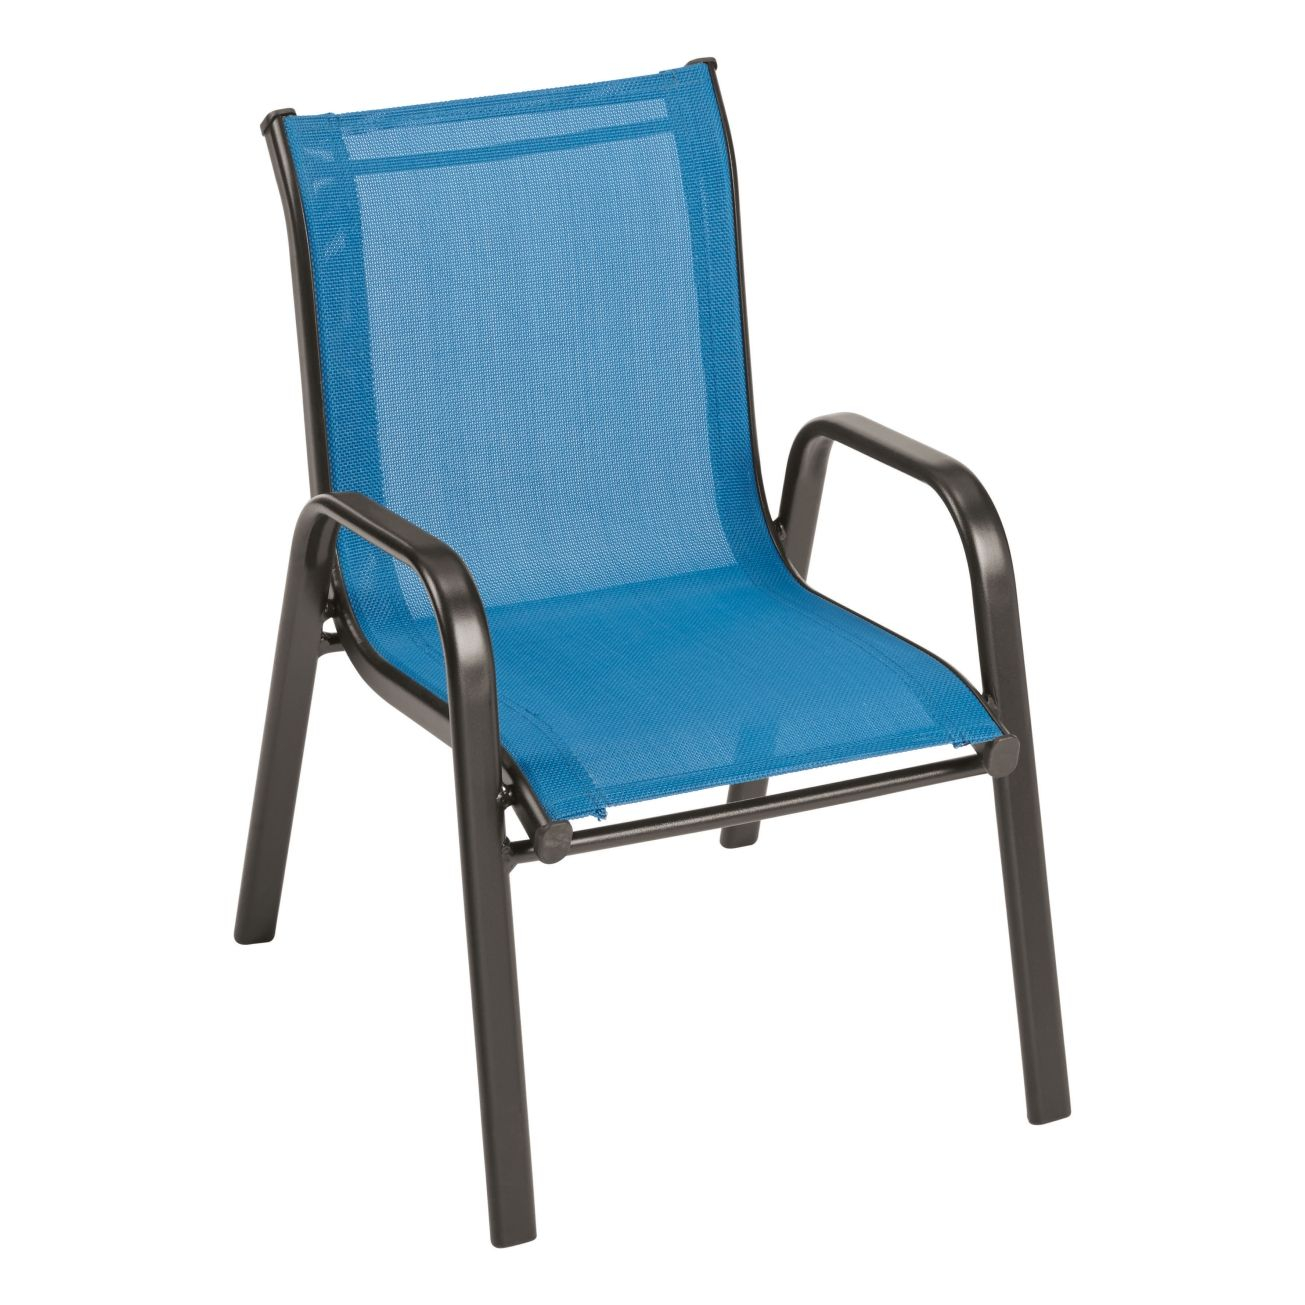 Fairview Kids Blue Stacking Chair Outdoor Dining Chairs within sizing 1305 X 1305